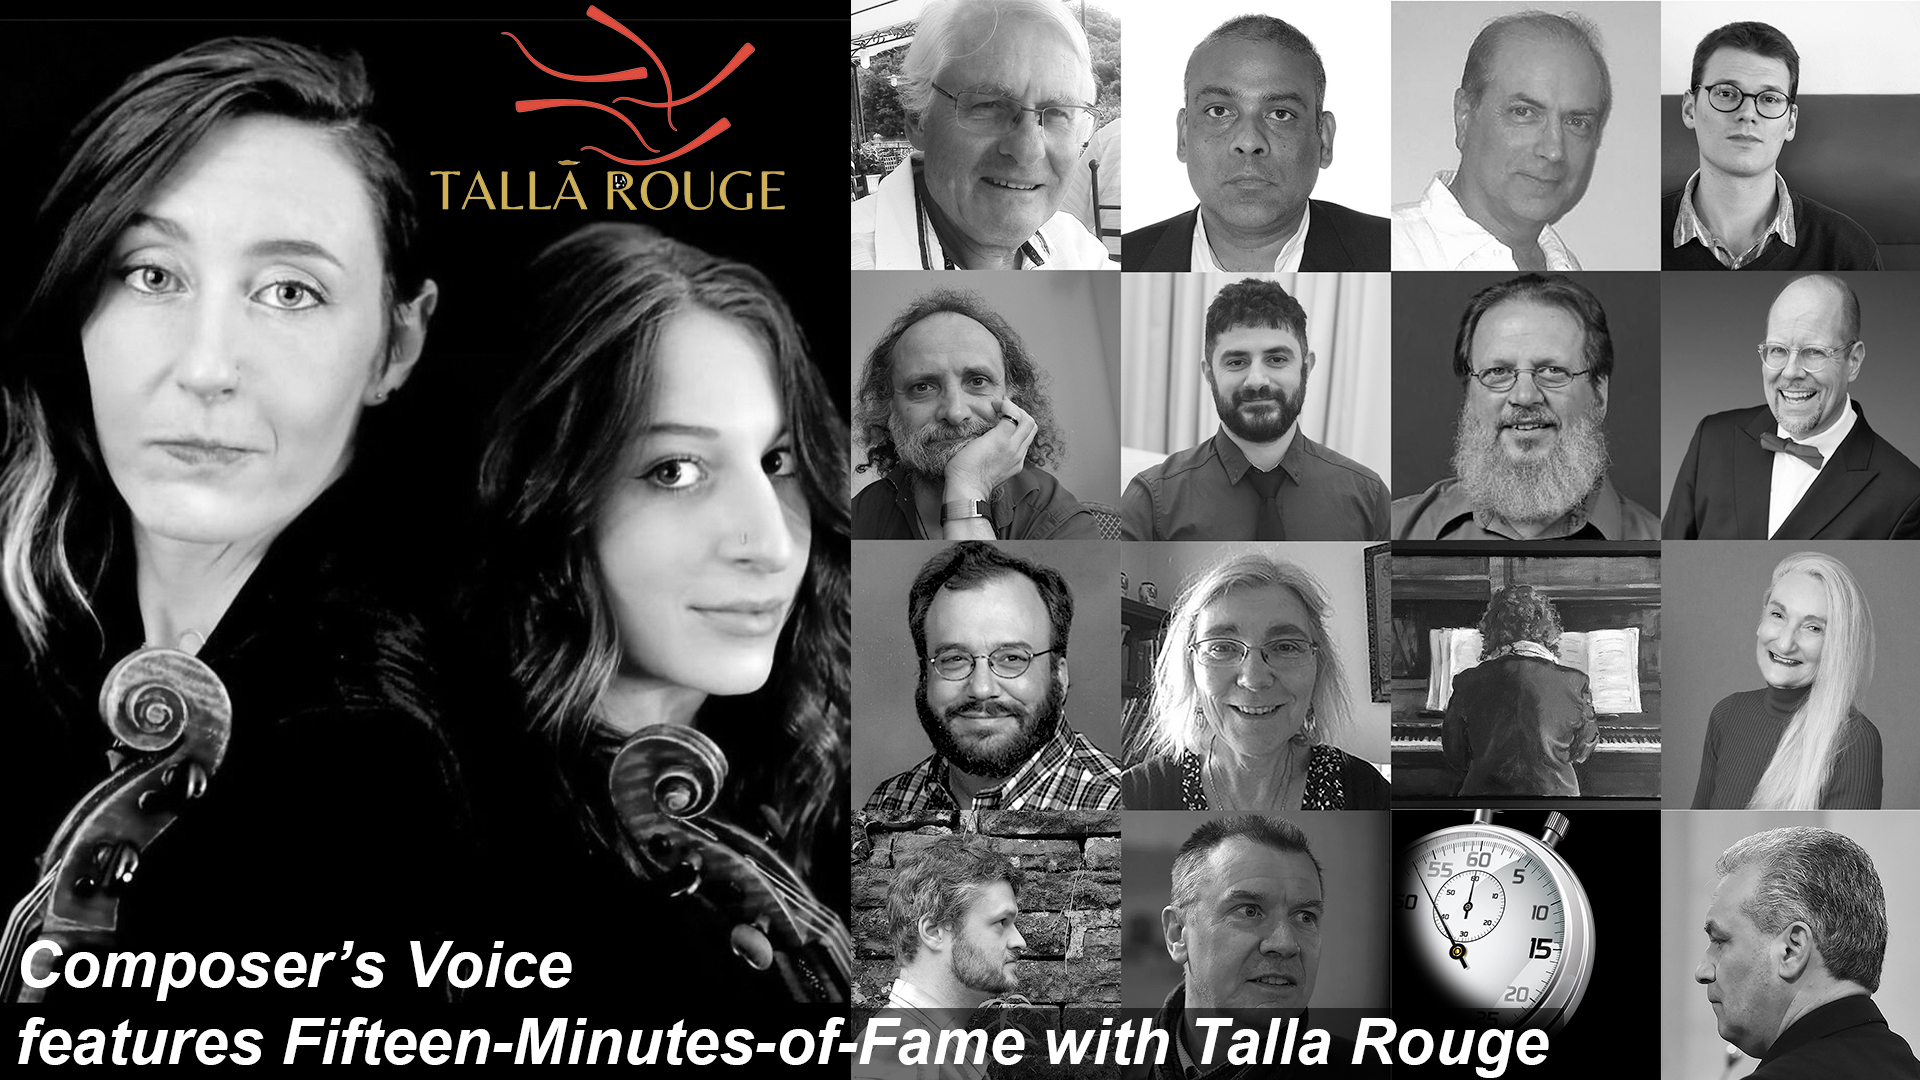 Featuring Talla Rouge